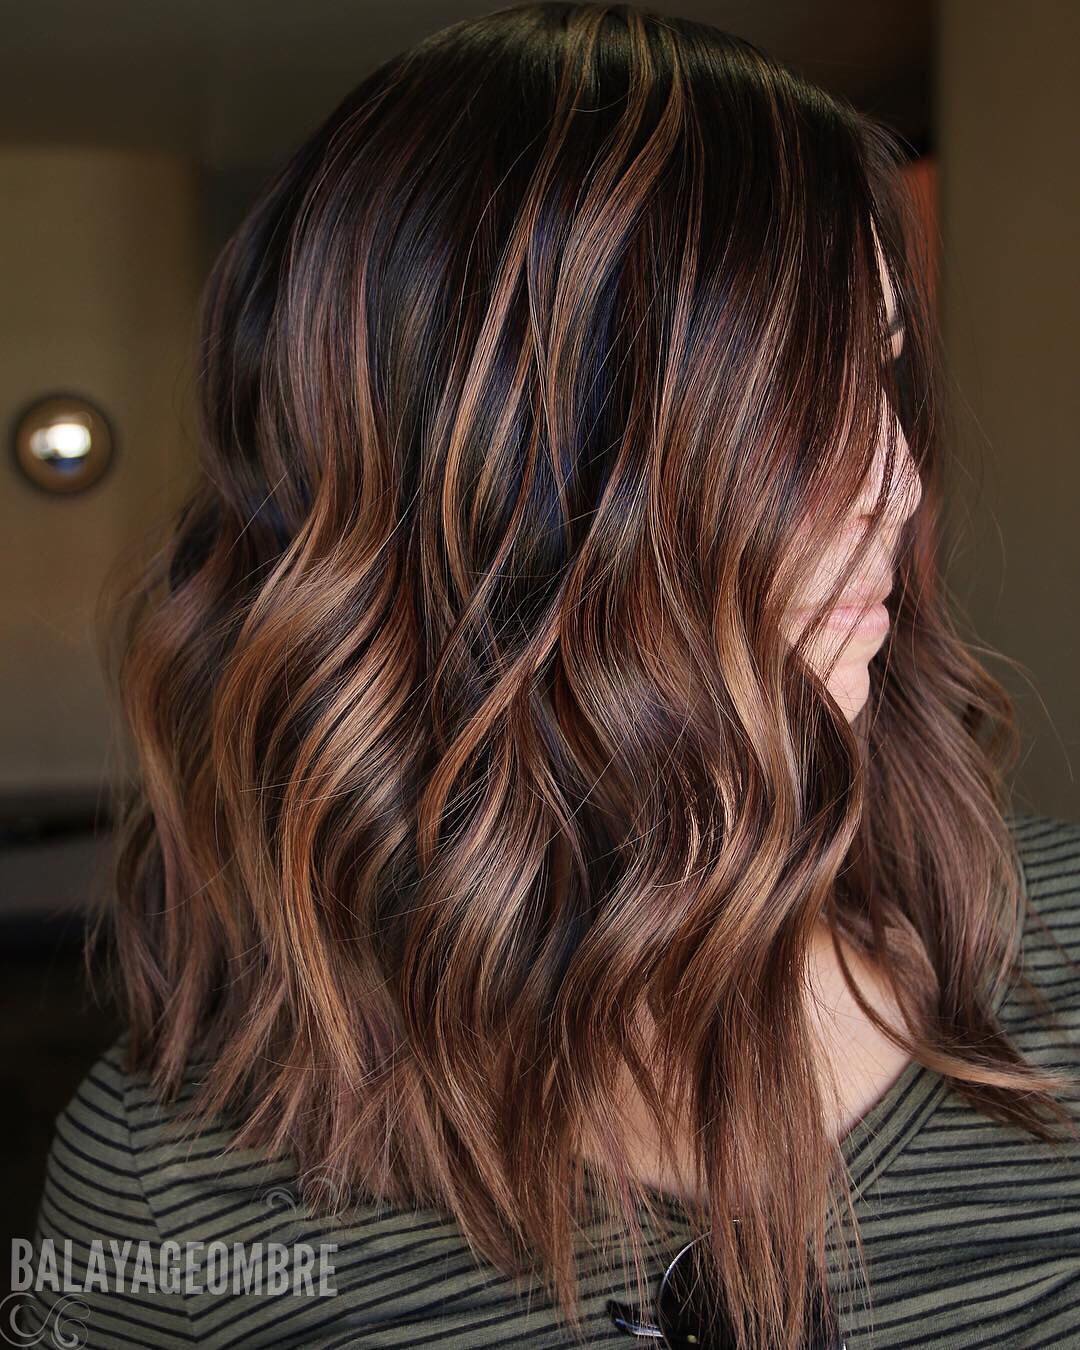 Stylish Balayage Ombre Long Hair Style for Women, Long Haircut Designs